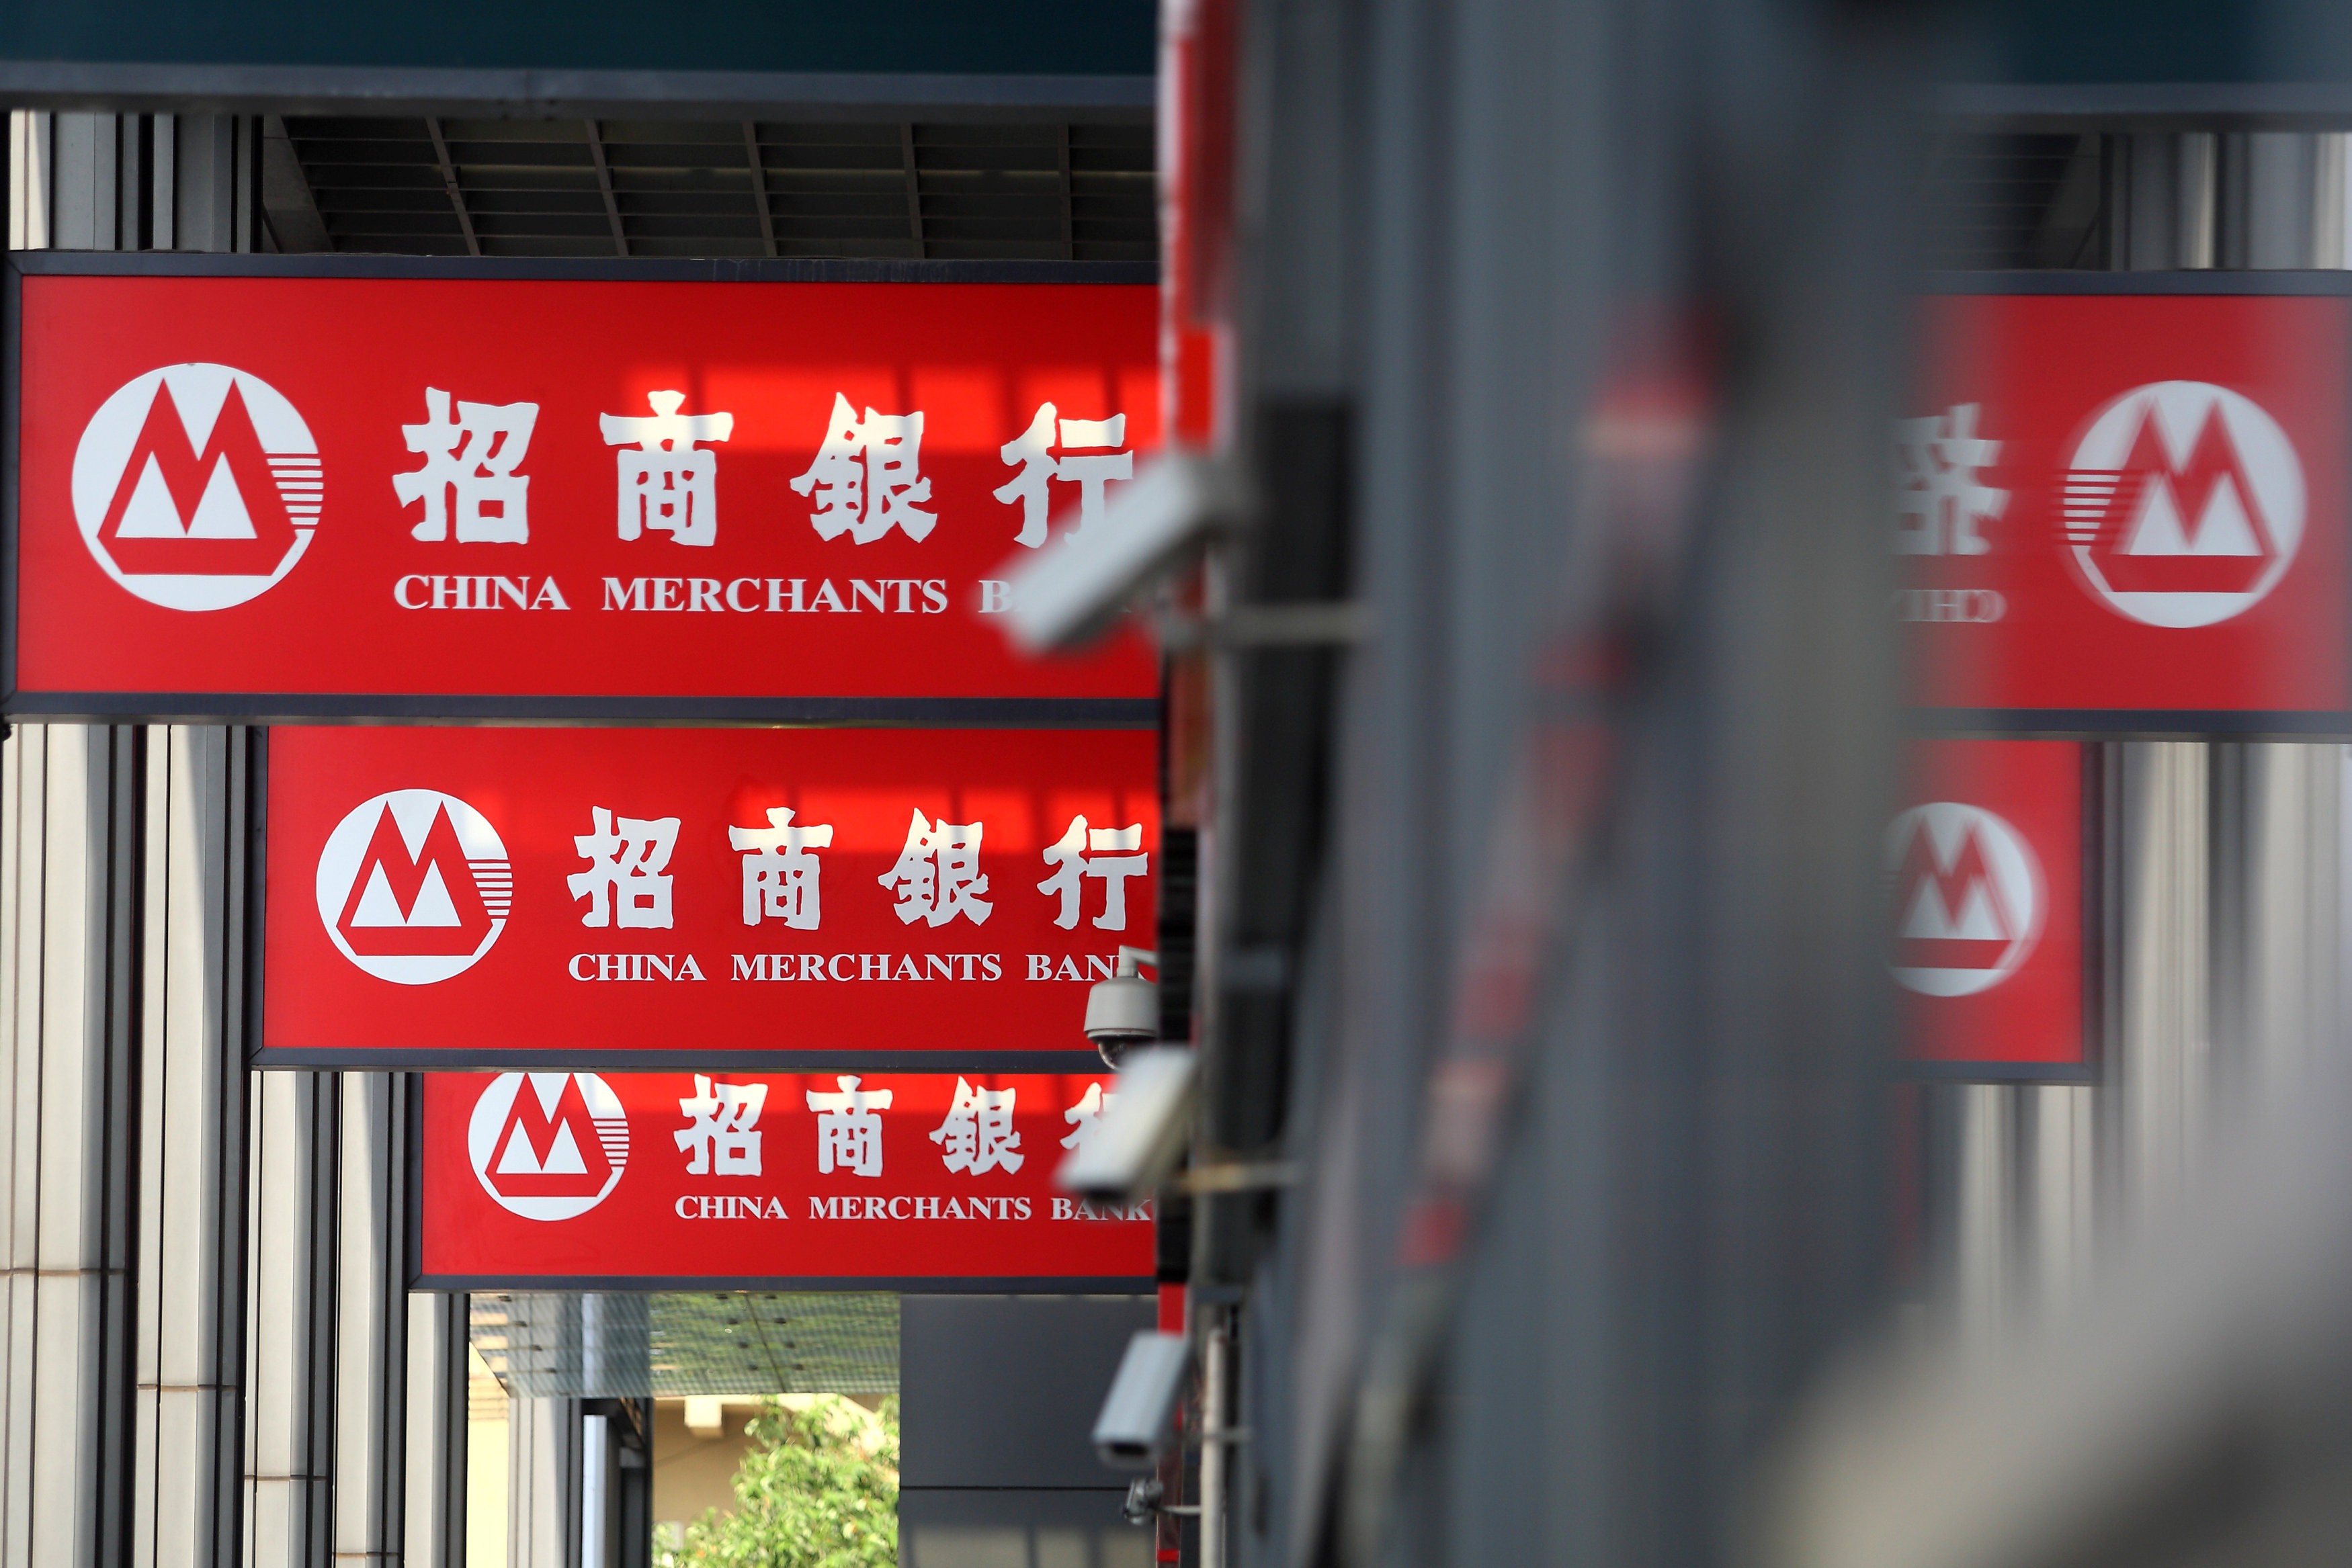 China Merchants Bank made pre tax profits of 39.26 billion yuan in the first six months of the year, up from the 35.2 billion yuan in the year-earlier period. Photo: Reuters